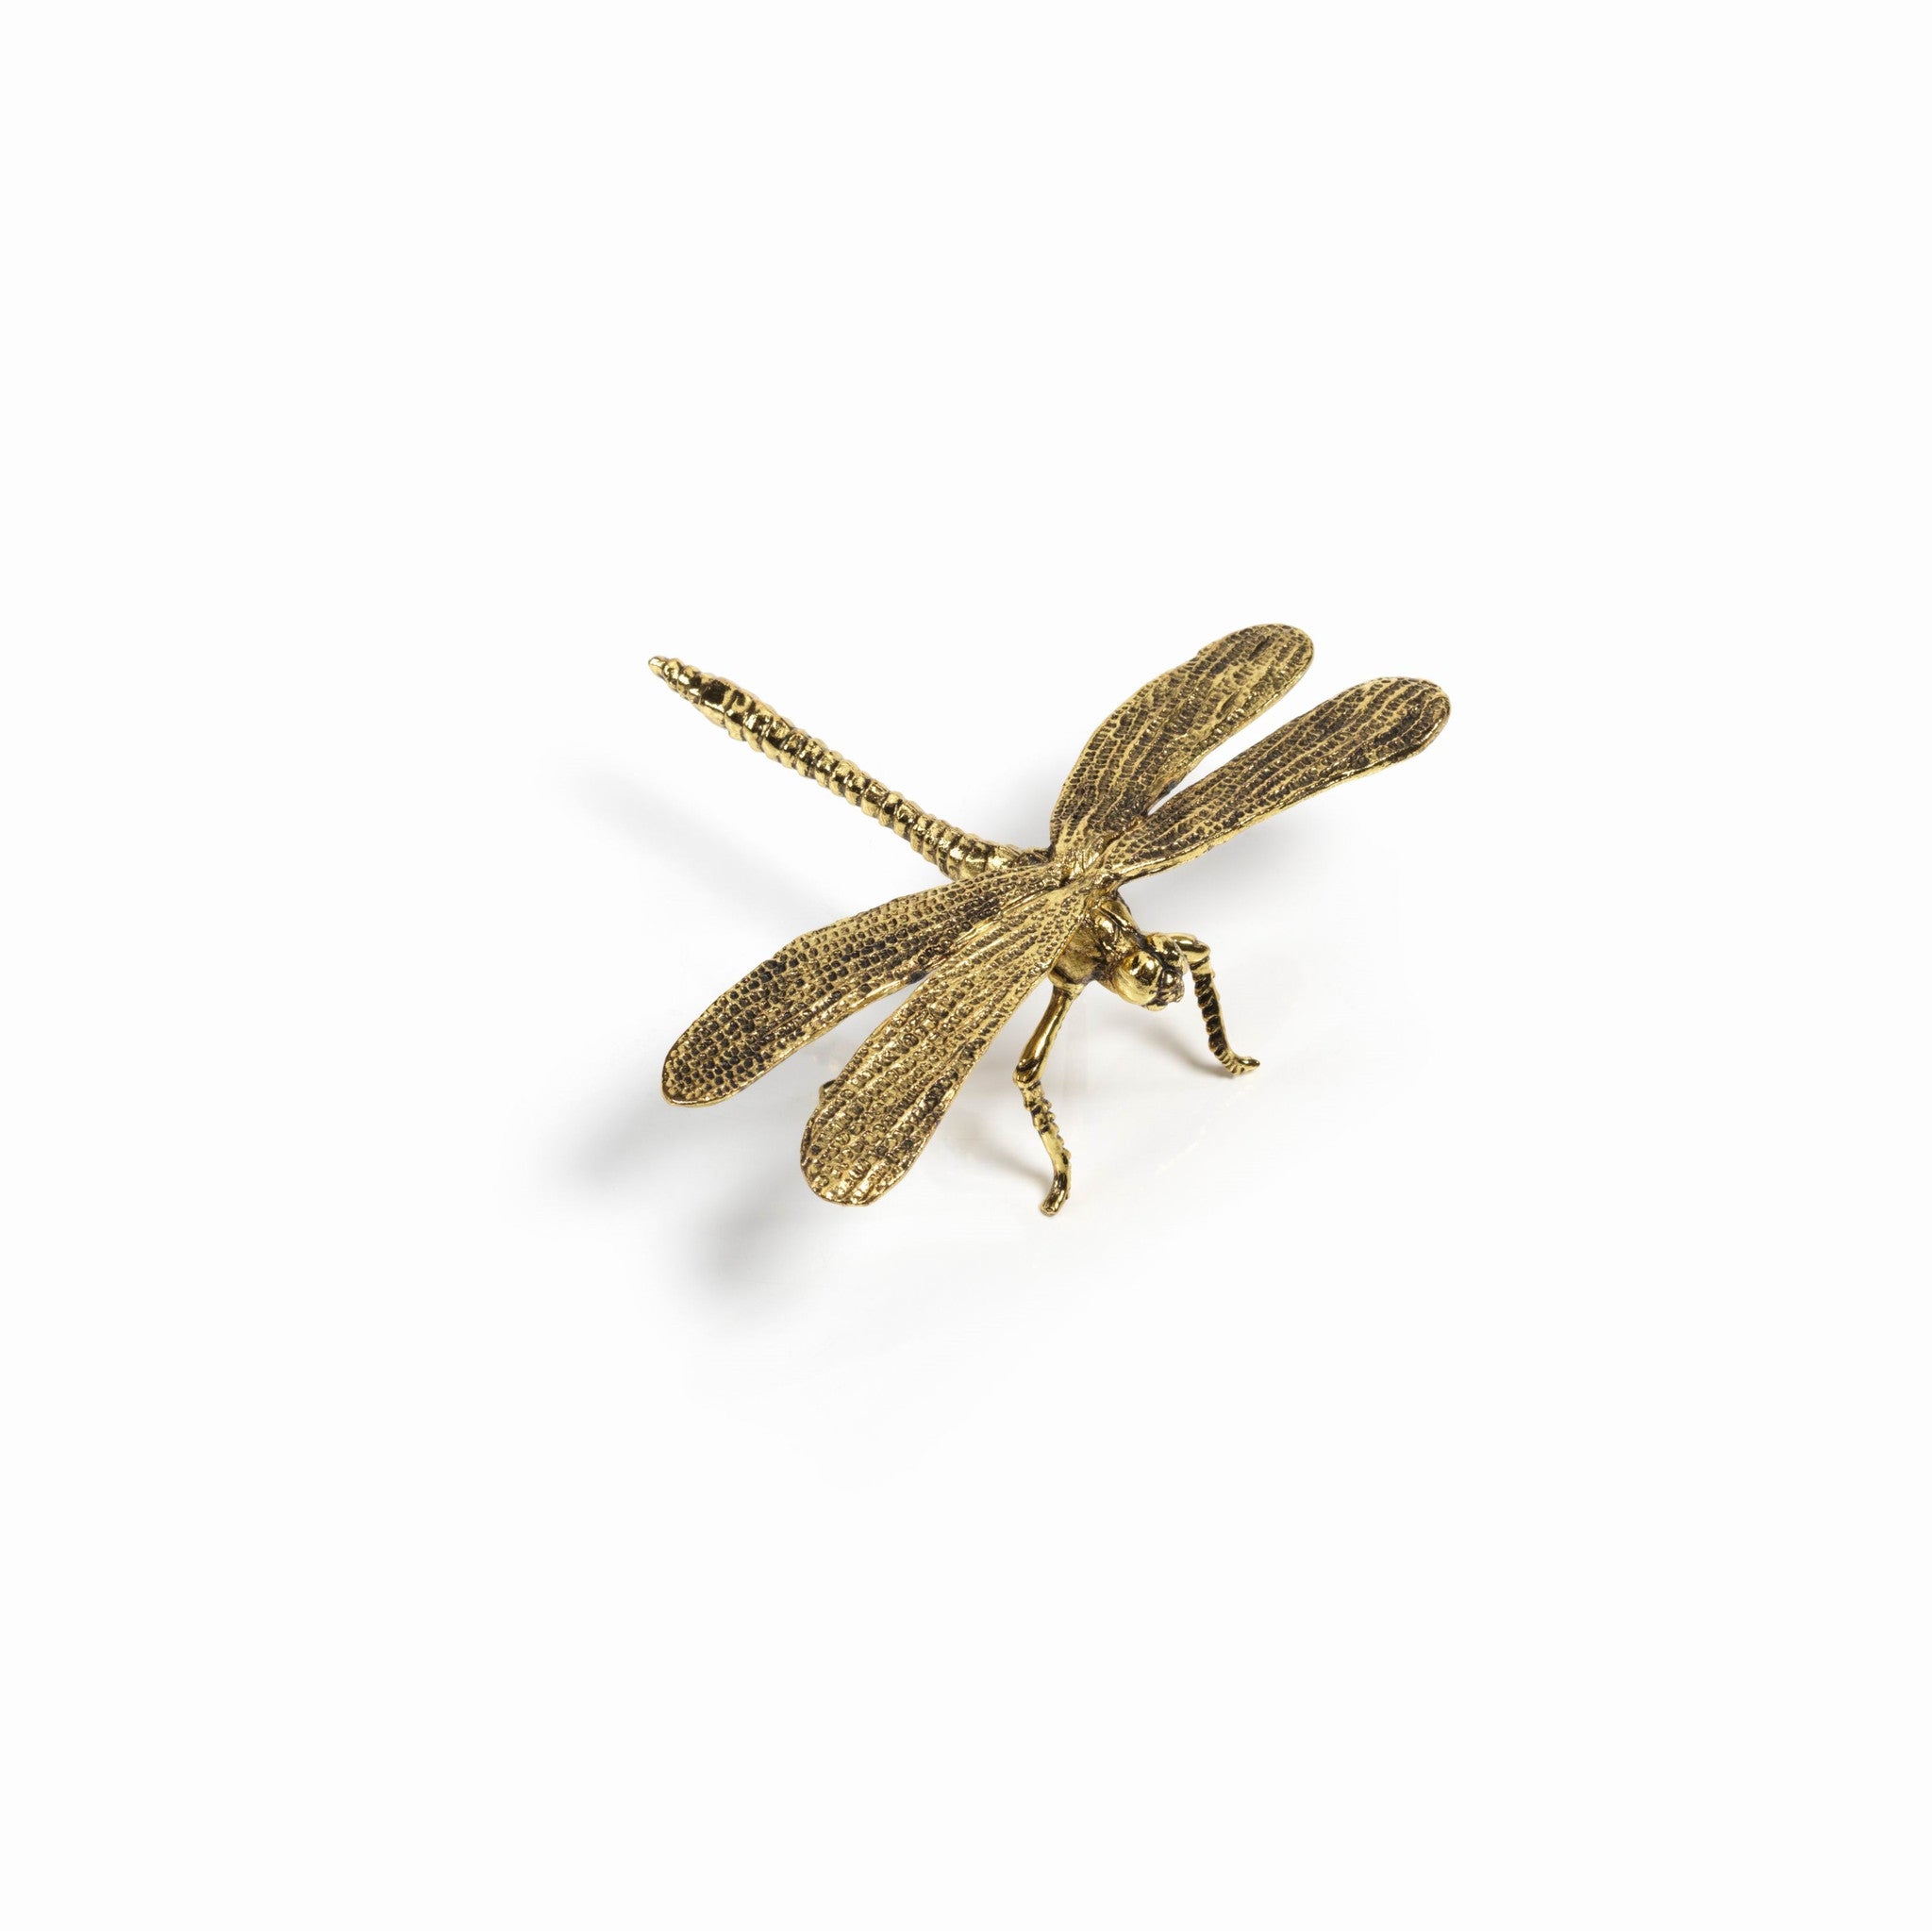 Decorative Gold Dragonfly - CARLYLE AVENUE